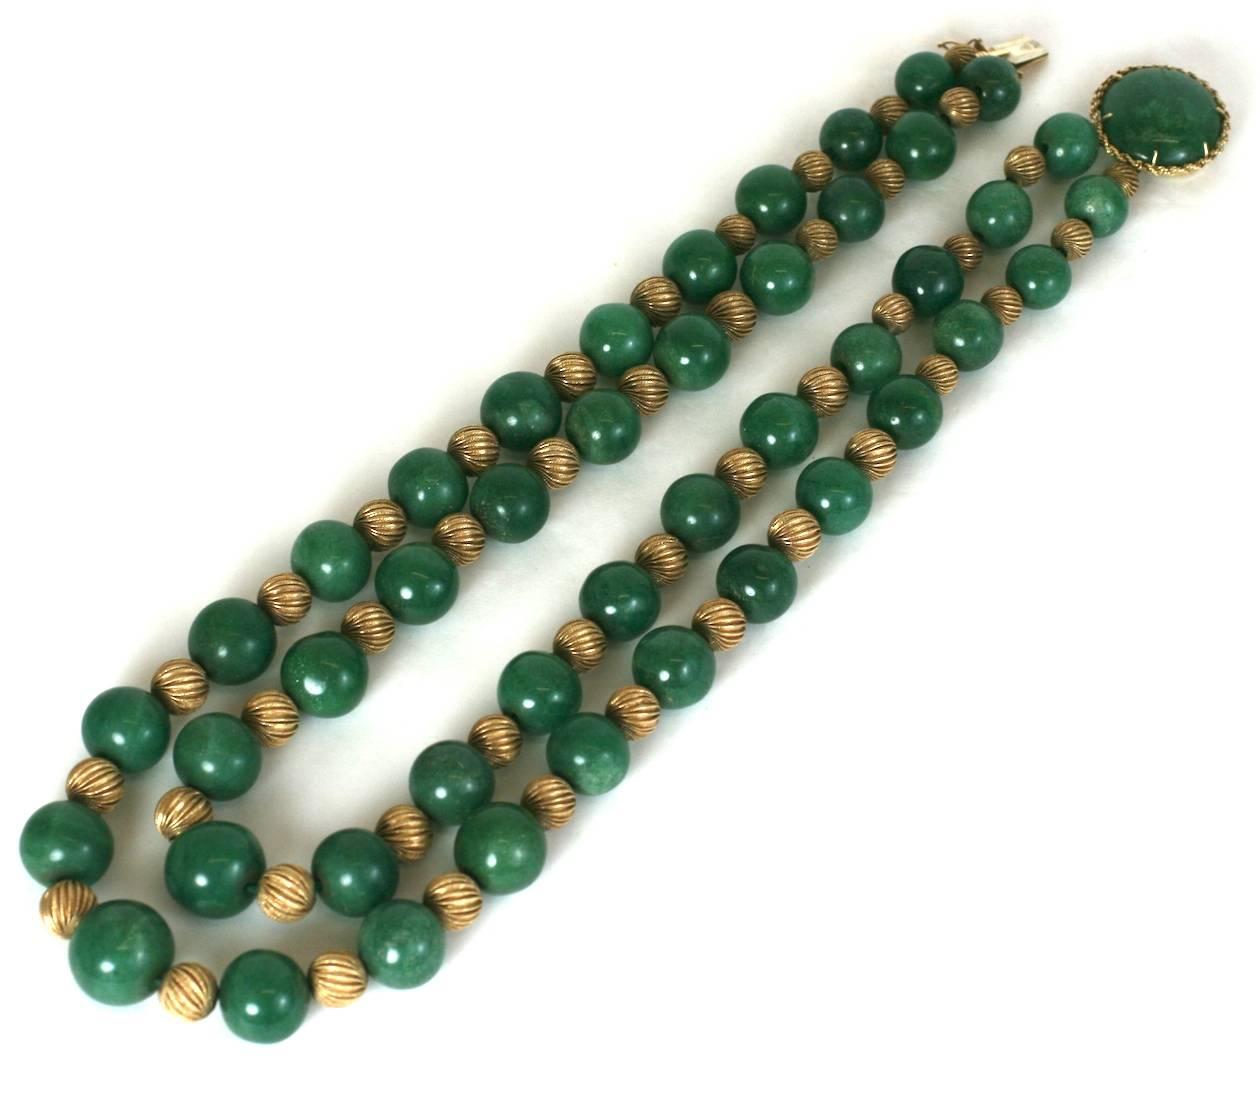 Women's Adventurine and Ribbed Gold Bead Necklace For Sale